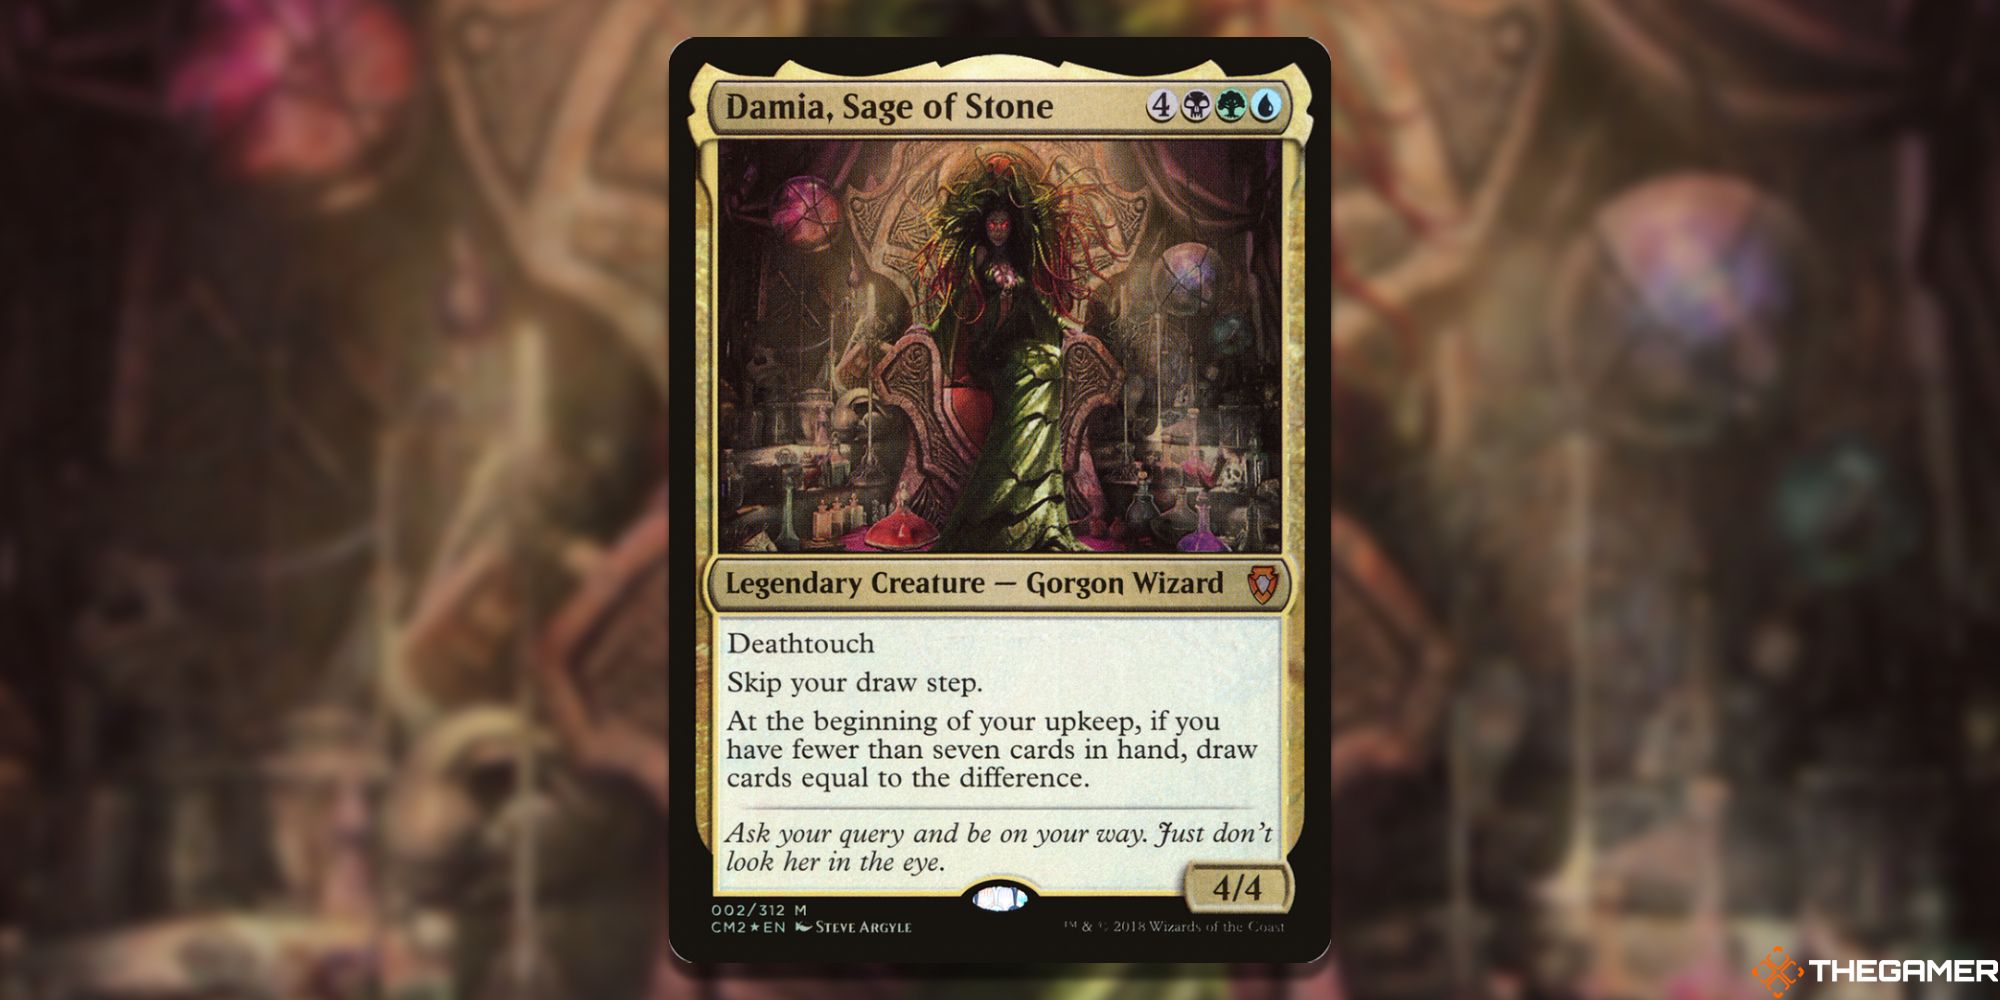 Image of the Damia, Sage of Stone card in Magic: The Gathering, with art by Steve Argyle